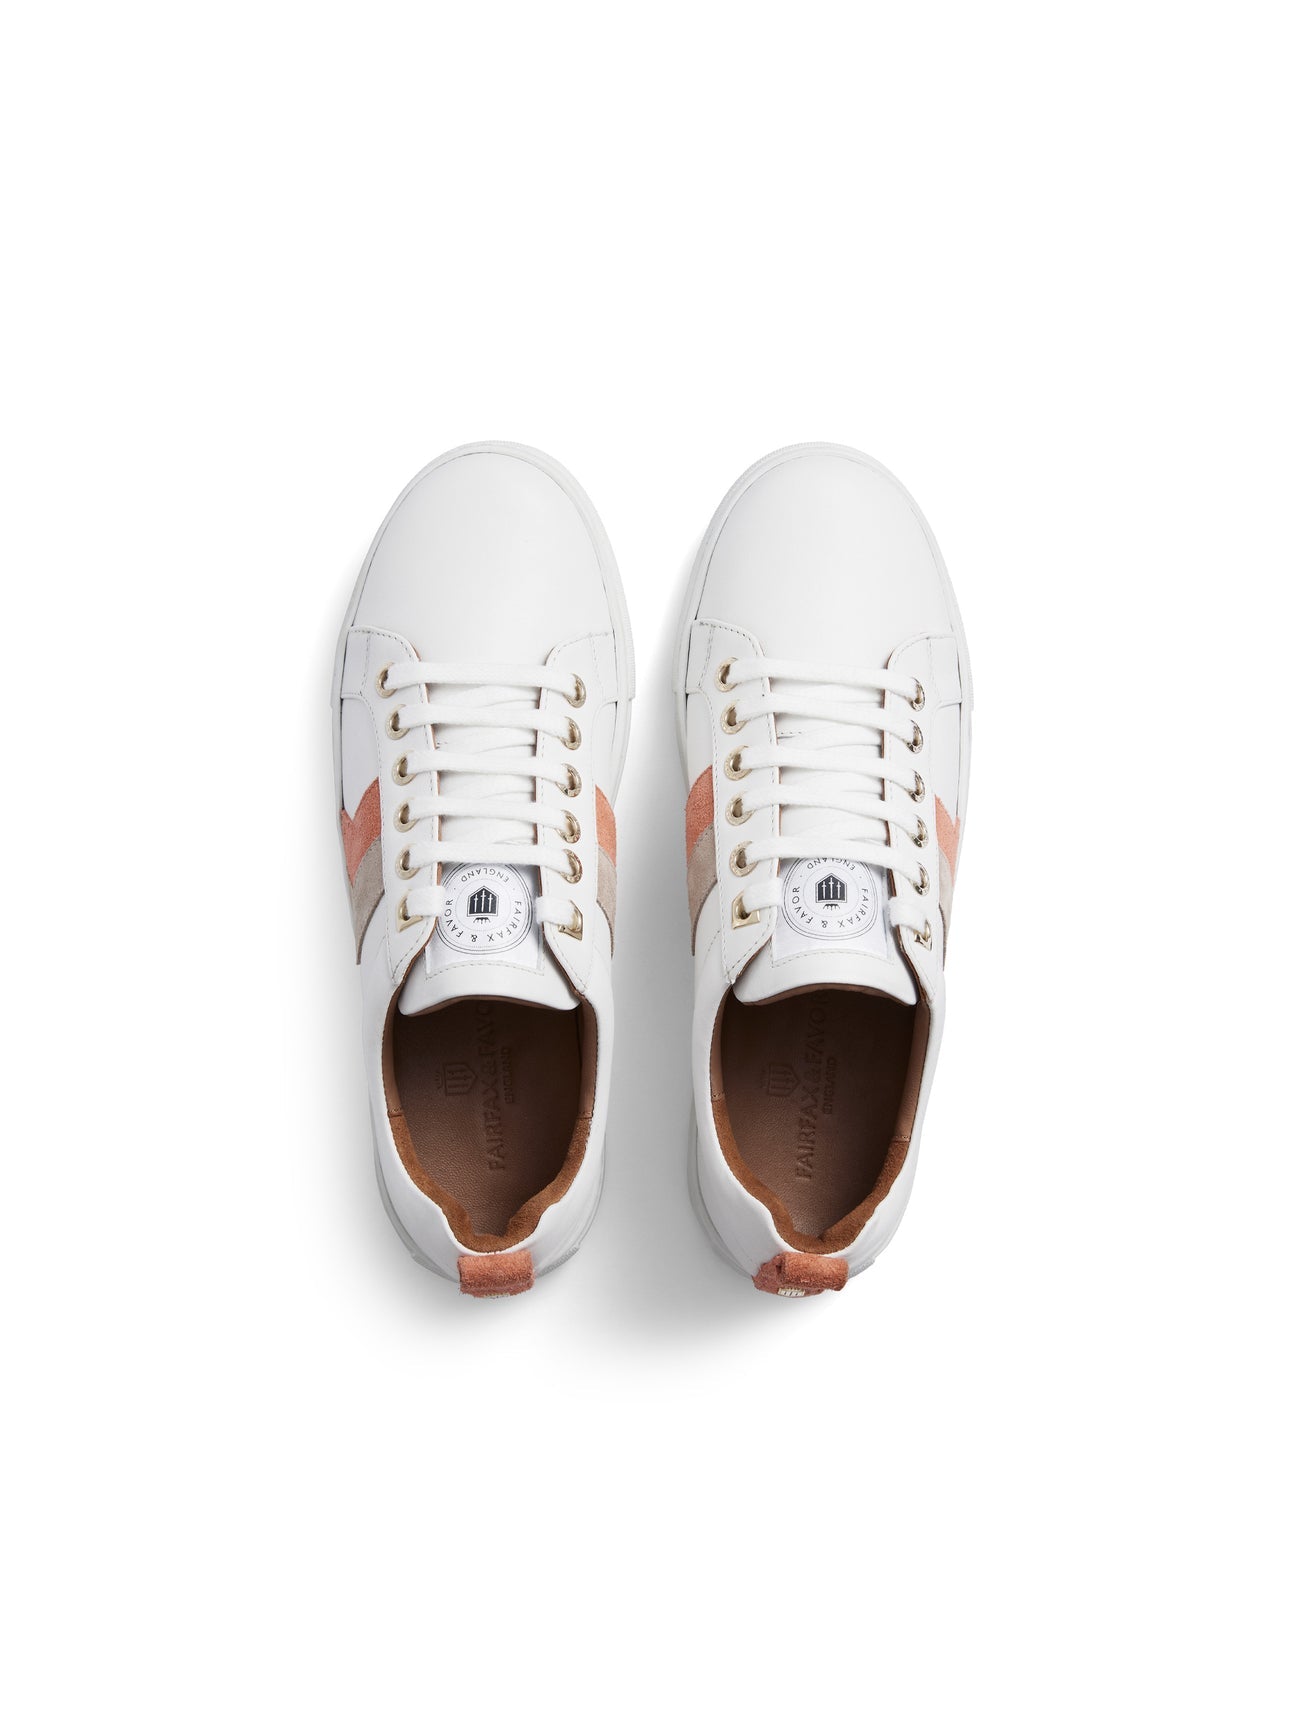 Alexandra Women's Trainer - White Leather with Melon & Stone Suede